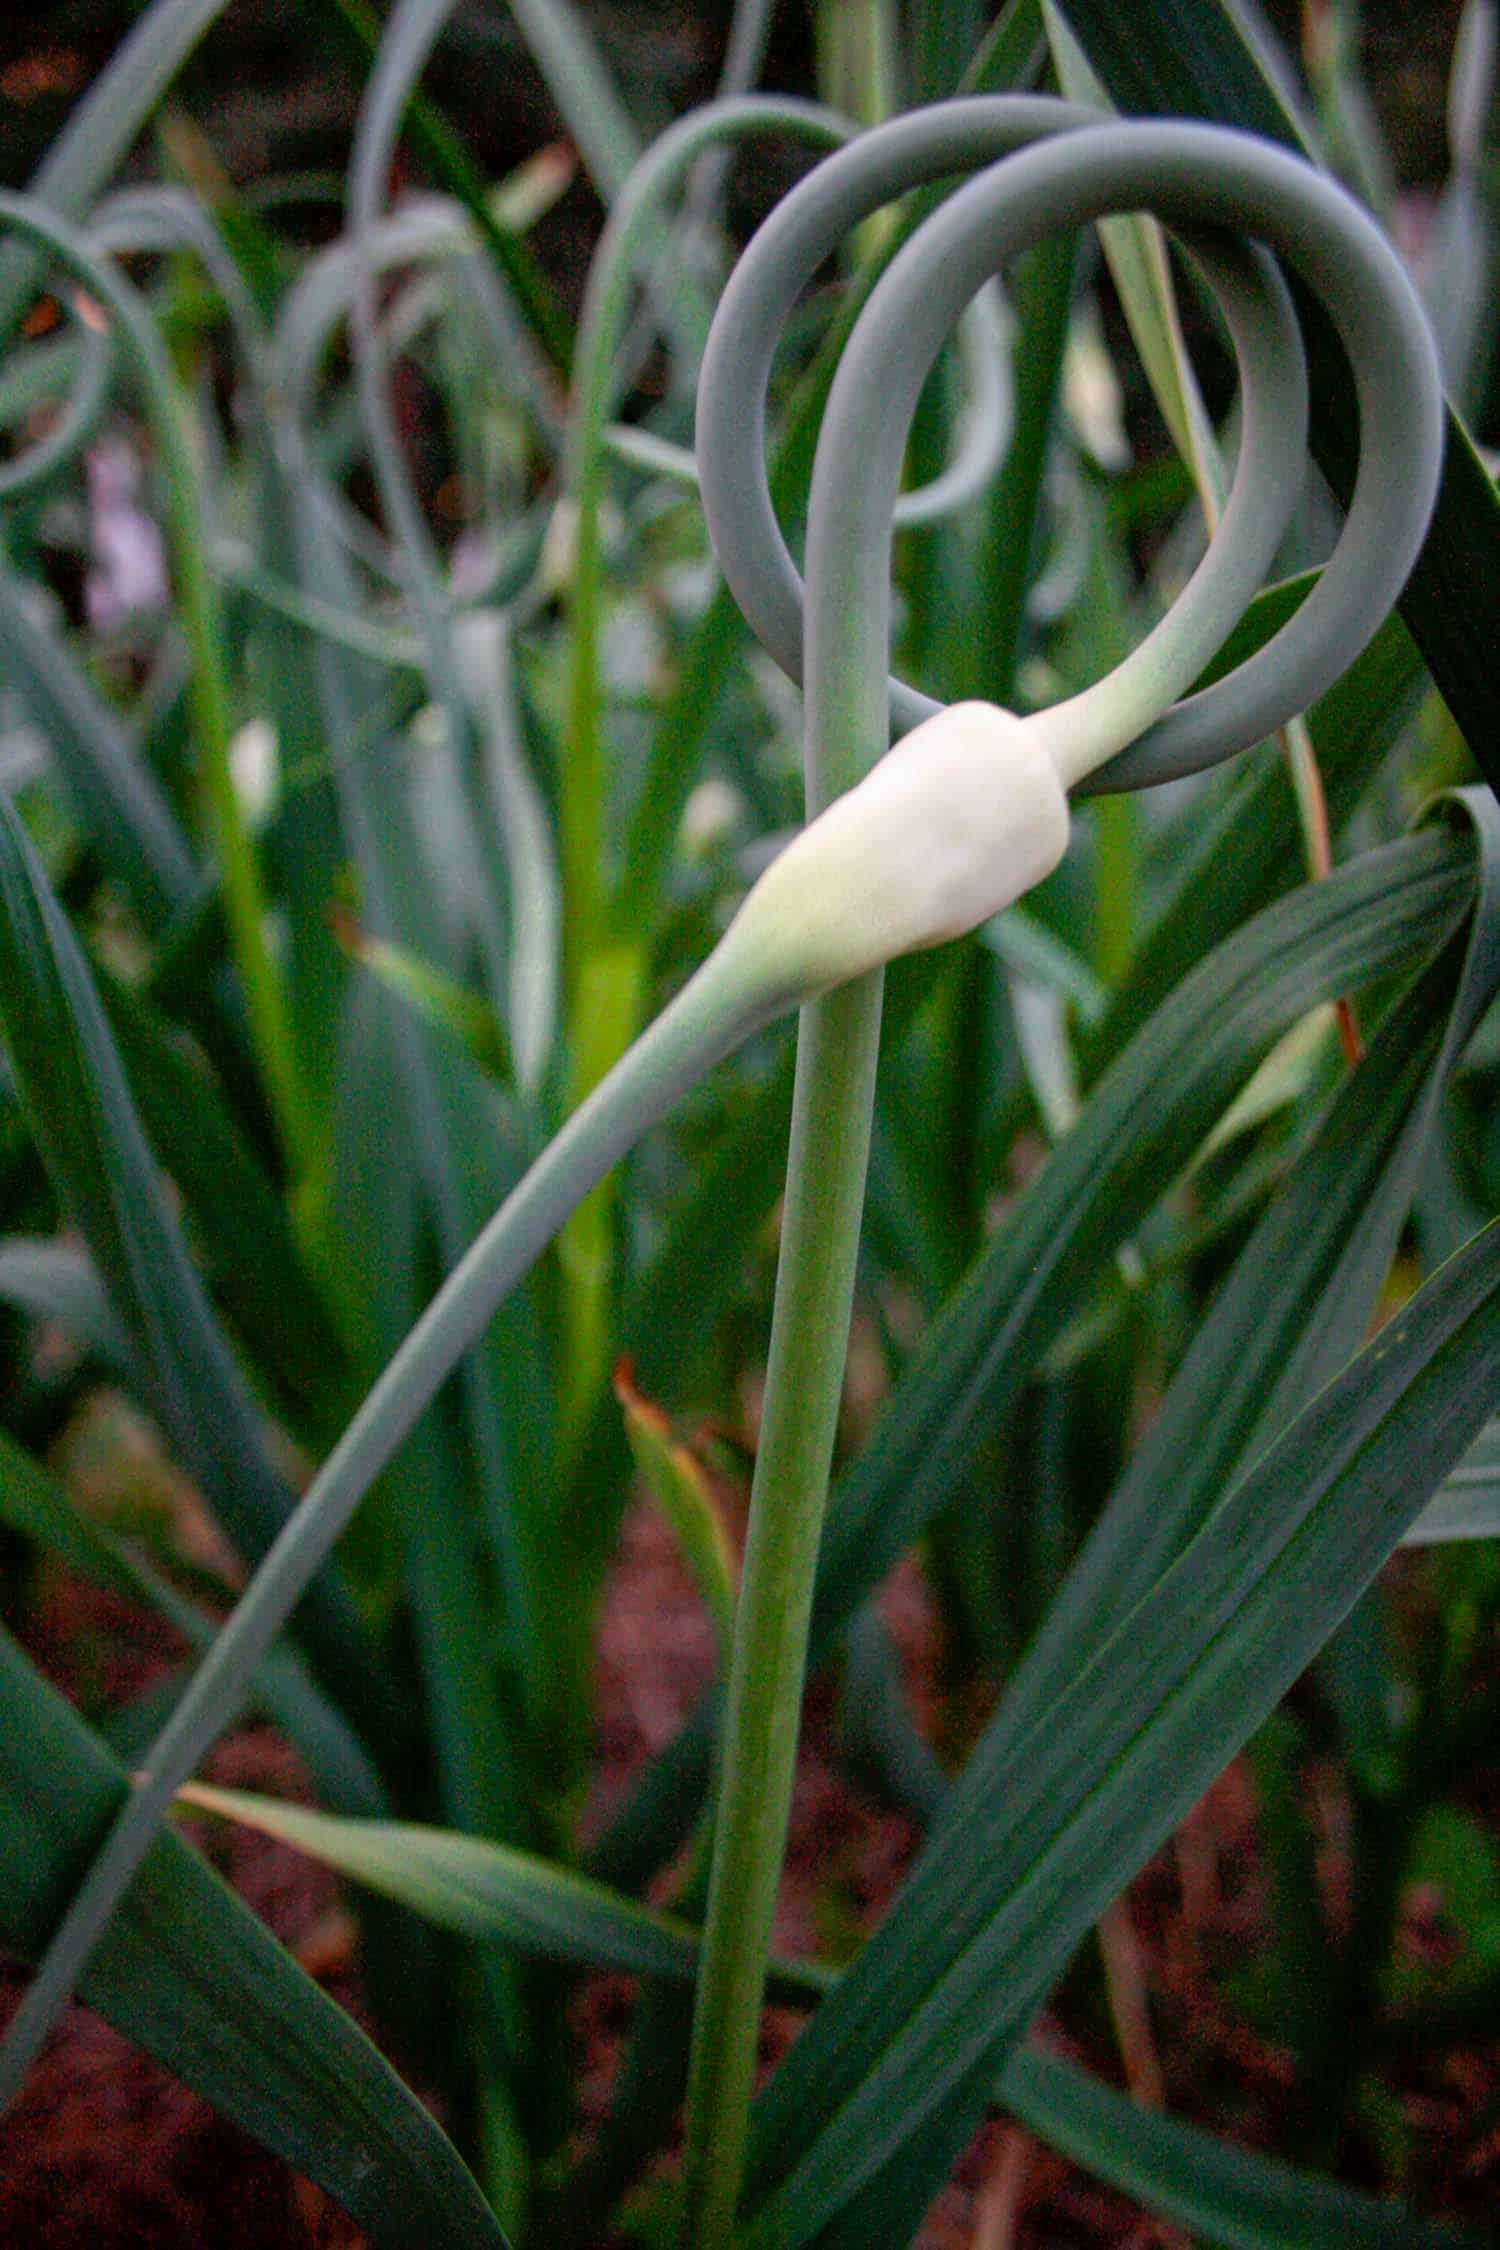 Garlic scapes growing in a field.